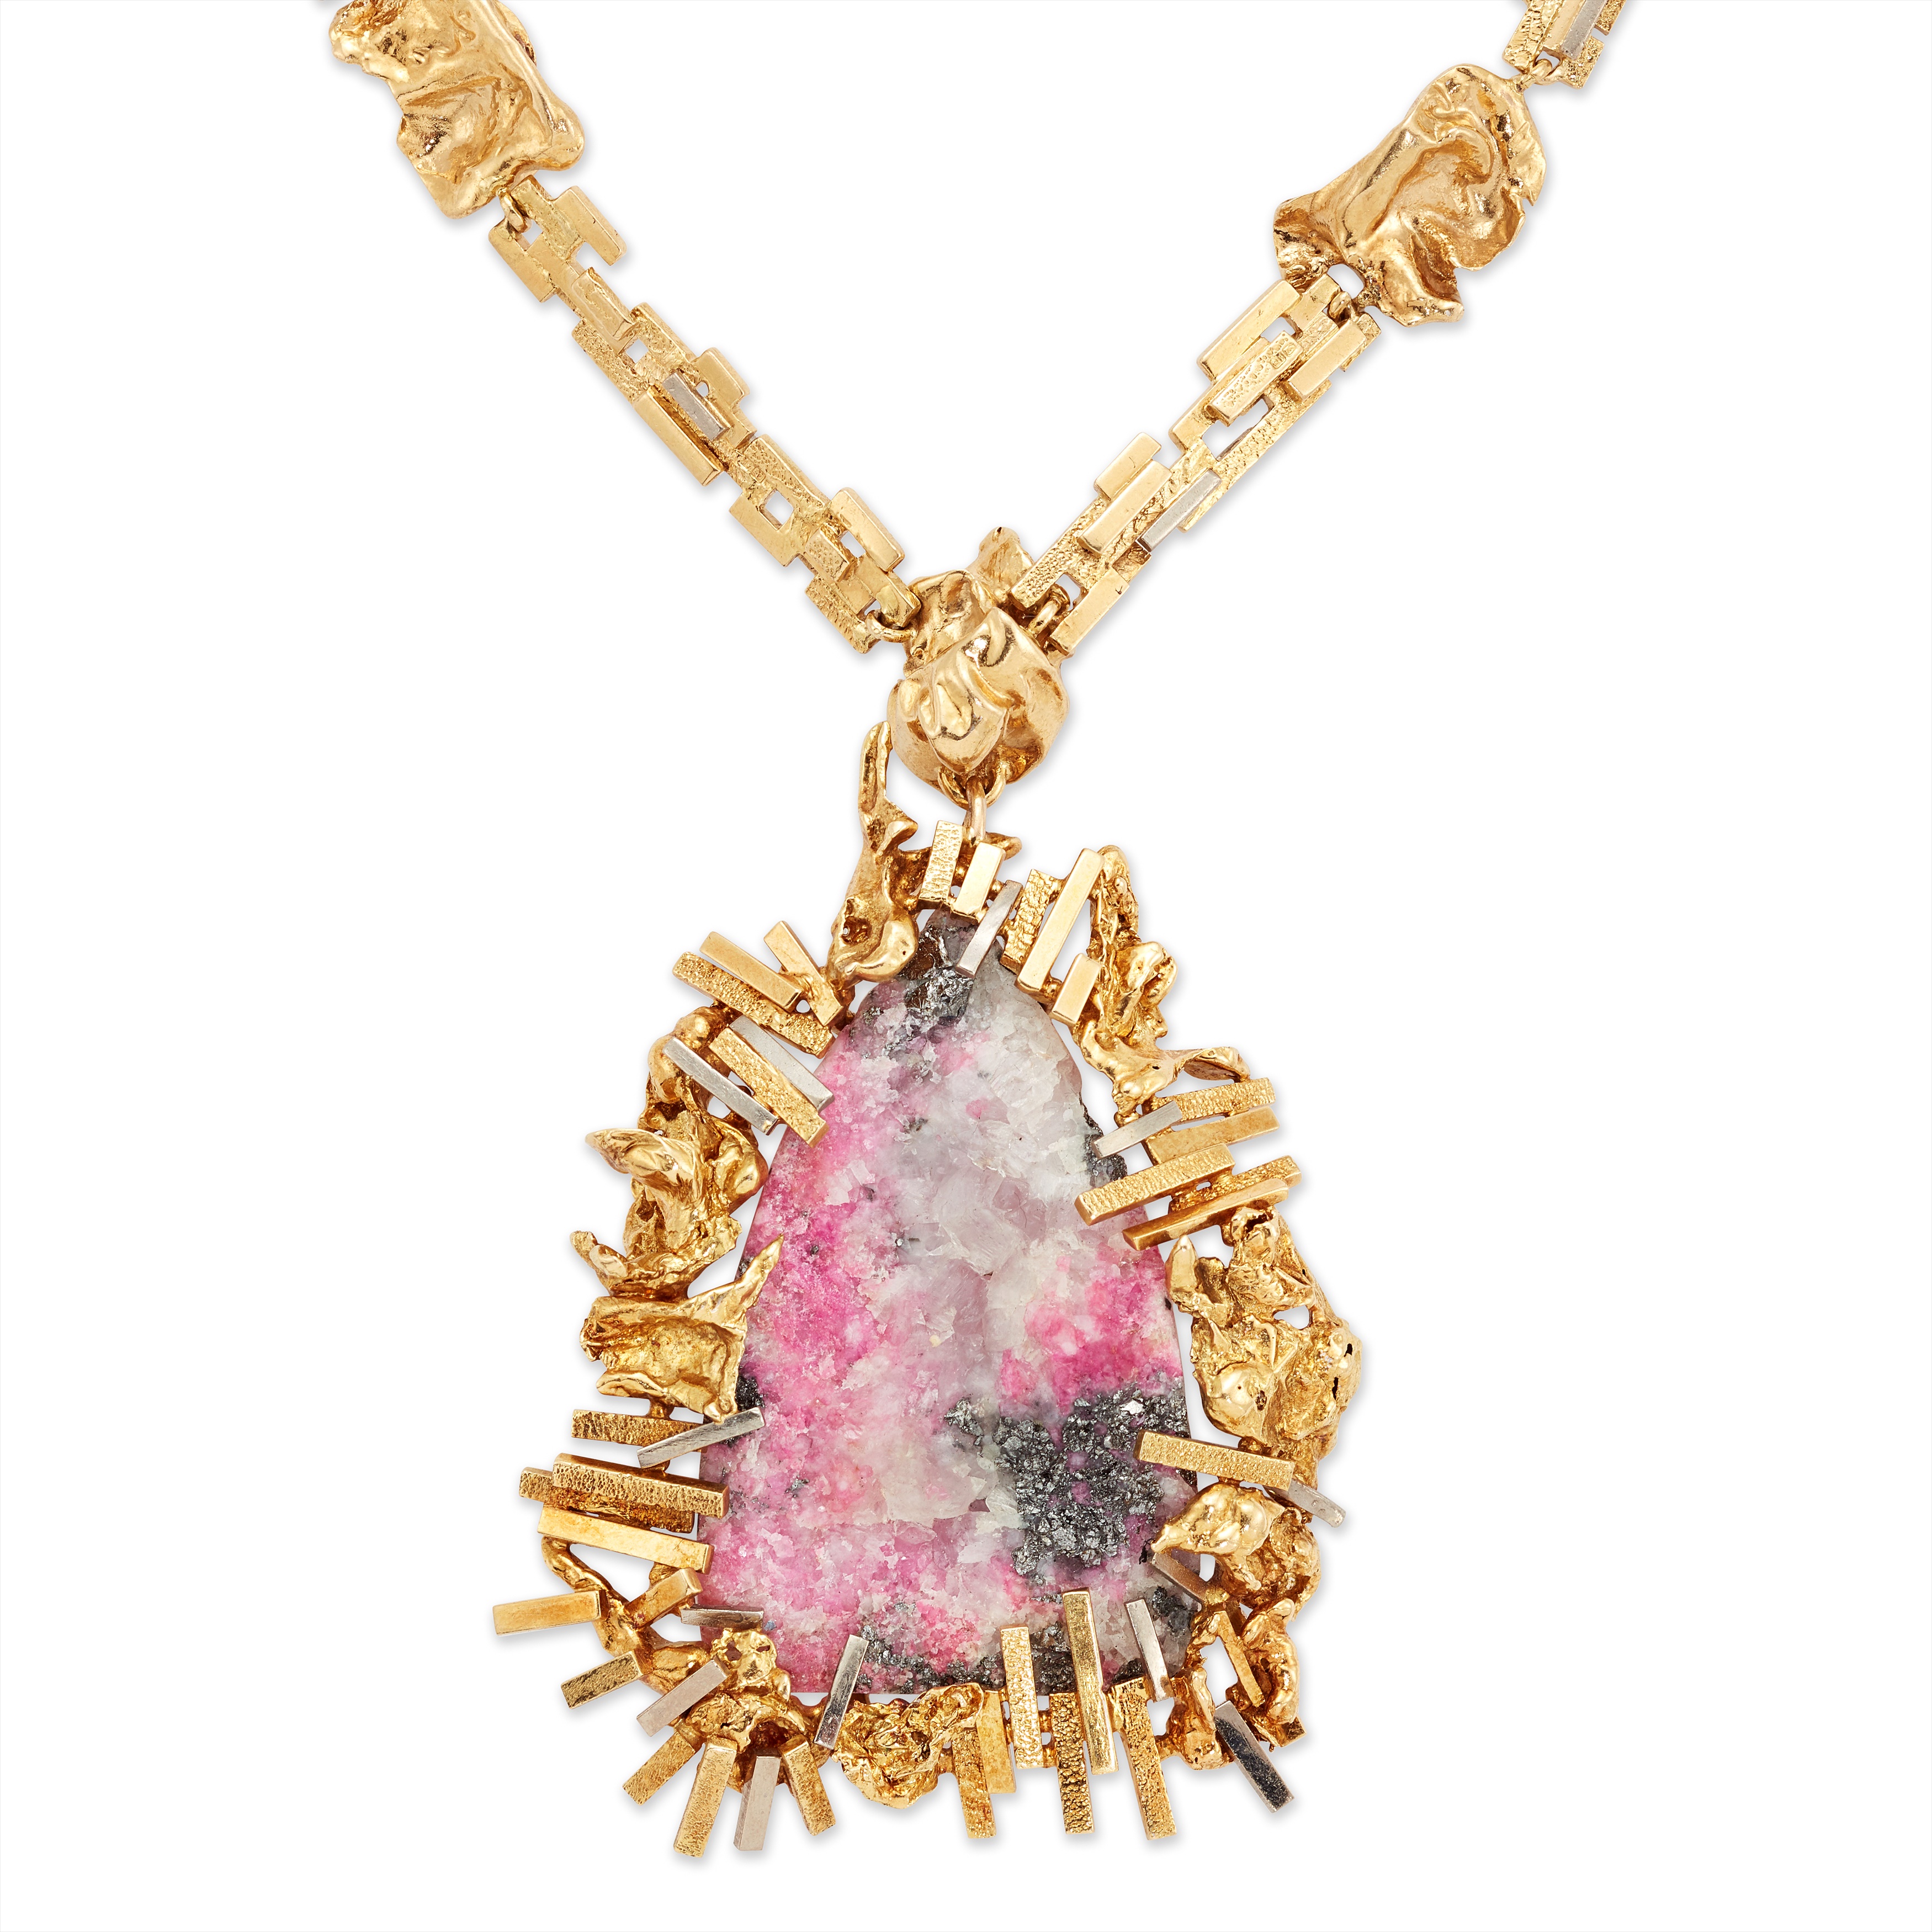 TWO- COLOUR GOLD AND RHODOCHROSITE PENDANT BY GILIAN PACKARD